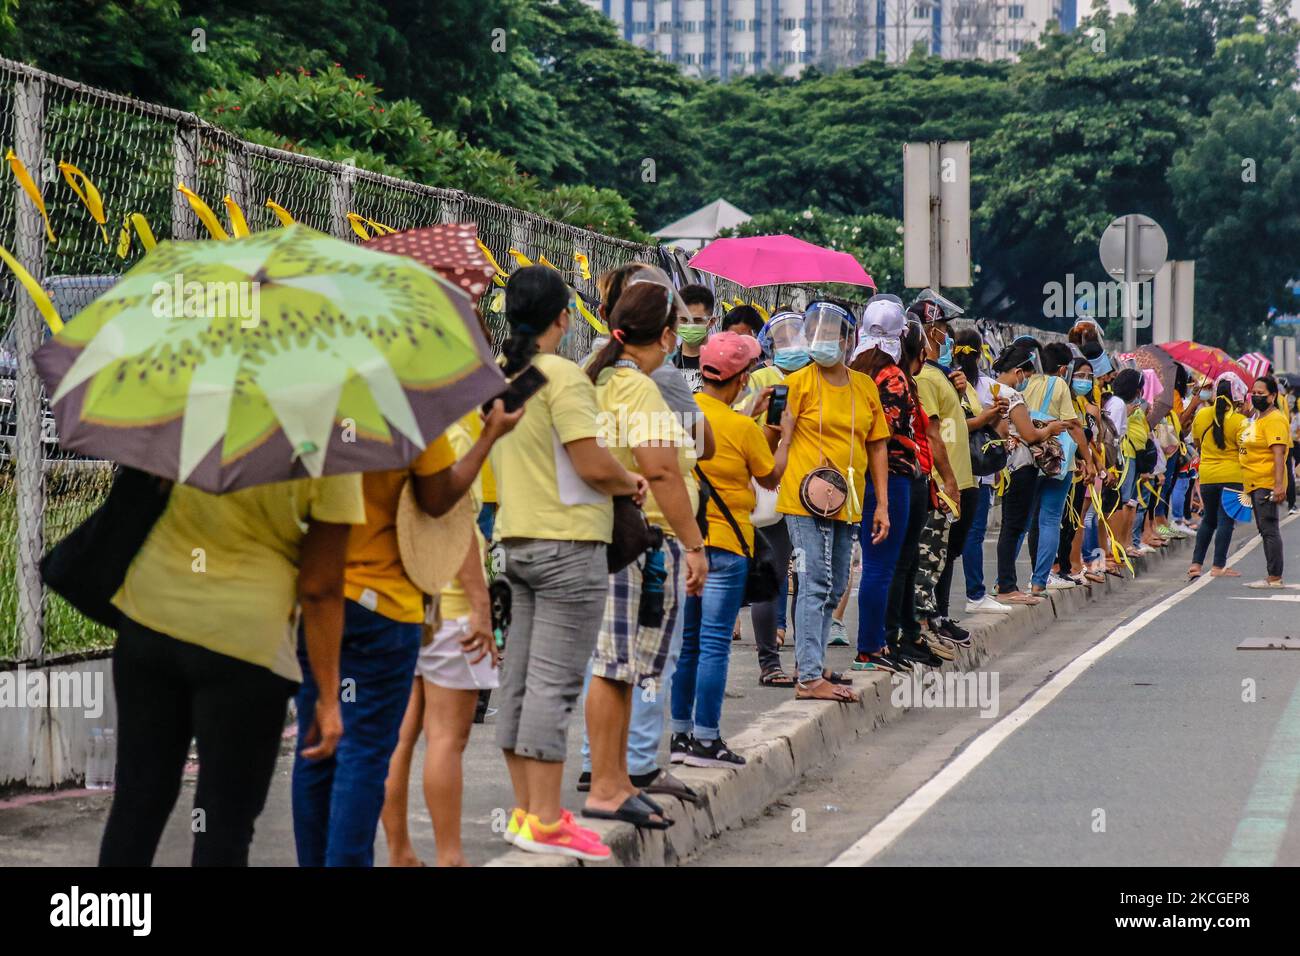 Supporters of Former President of the Philippines Benigno 'Noynoy' Aquino III are waiting in line to pay their respect to his ashes brought in Ateneo De Manila University in Quezon City, Philippines on June 25, 2021. Former President Benigno Aquino III publicly known as PNoy, peacefully died last Thursday morning, June 24, 2021 at the age of 61 because of Renal Disease. (Photo by Ryan Eduard Benaid/NurPhoto) Stock Photo